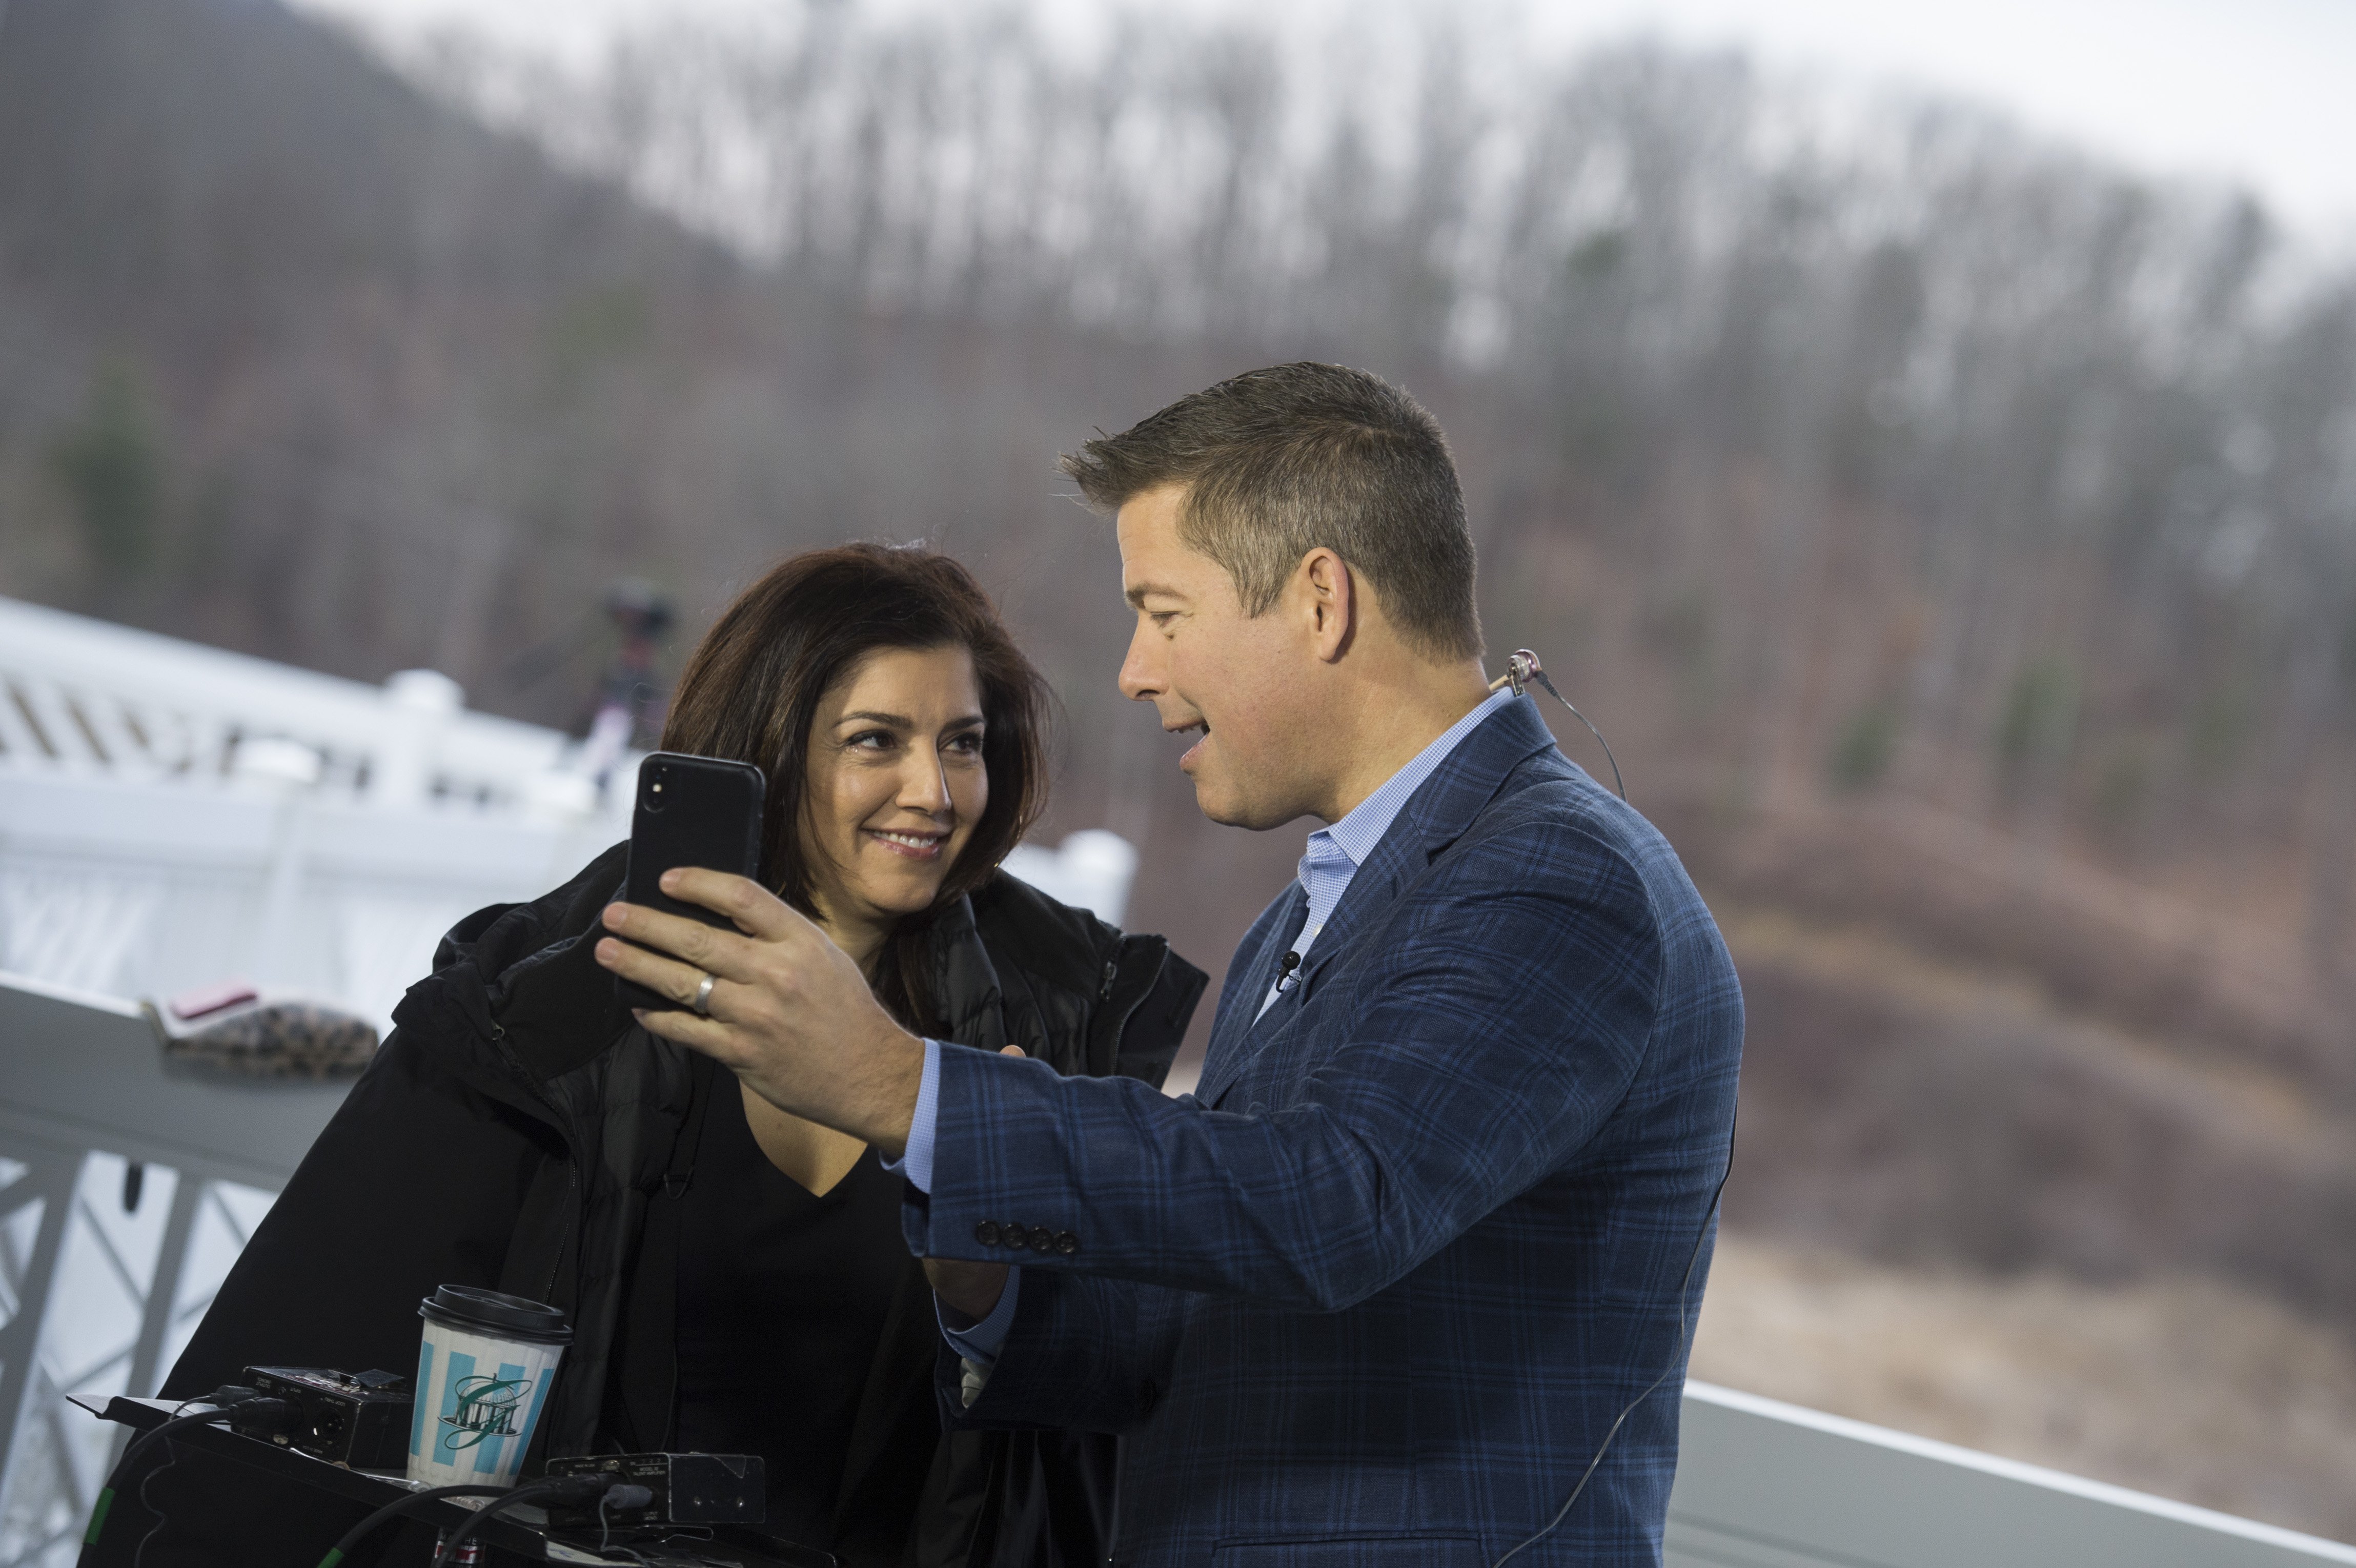 Rep. Sean Duffy, R-Wis., and his wife Rachel Campos-Duffy film a video at the media center during the House and Senate Republican retreat on February 1, 2018 |Photo: Getty Images